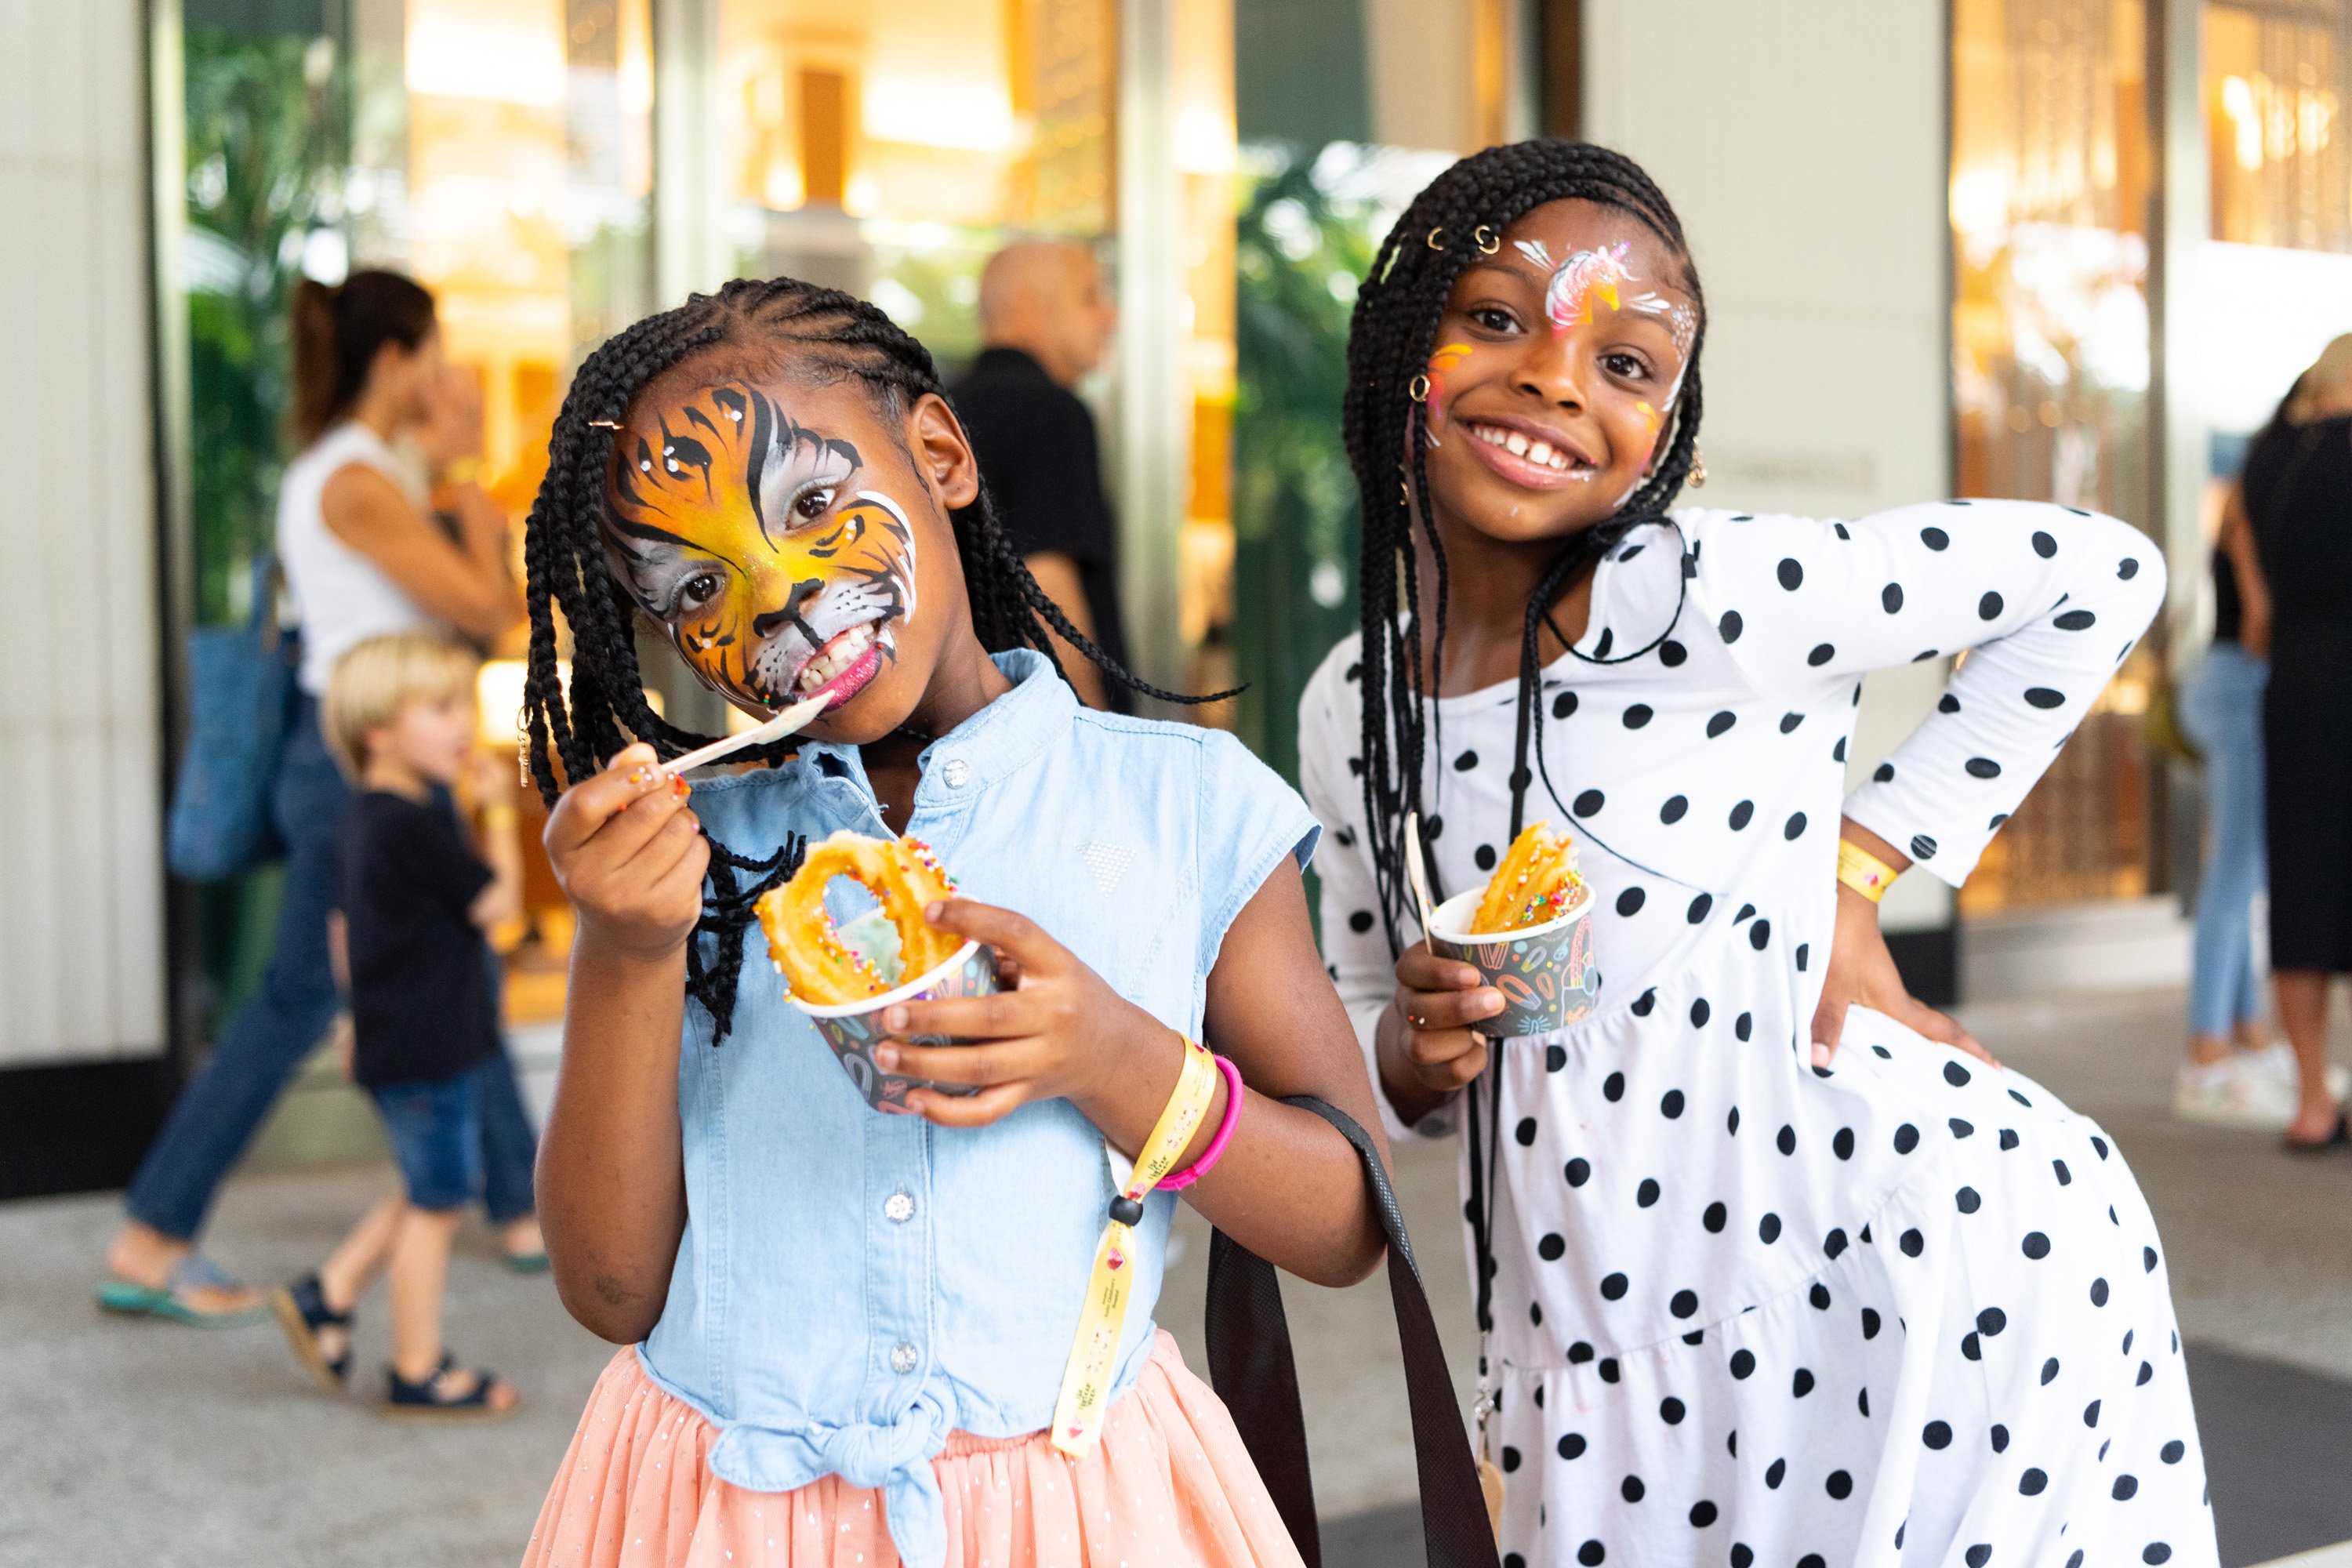 A variety of images showcasing the fourth annual “Ice Cream We Love” event. Images include guests in attendance, ice cream treats and setup, and activities featured at the event including games, face painting, and performances.